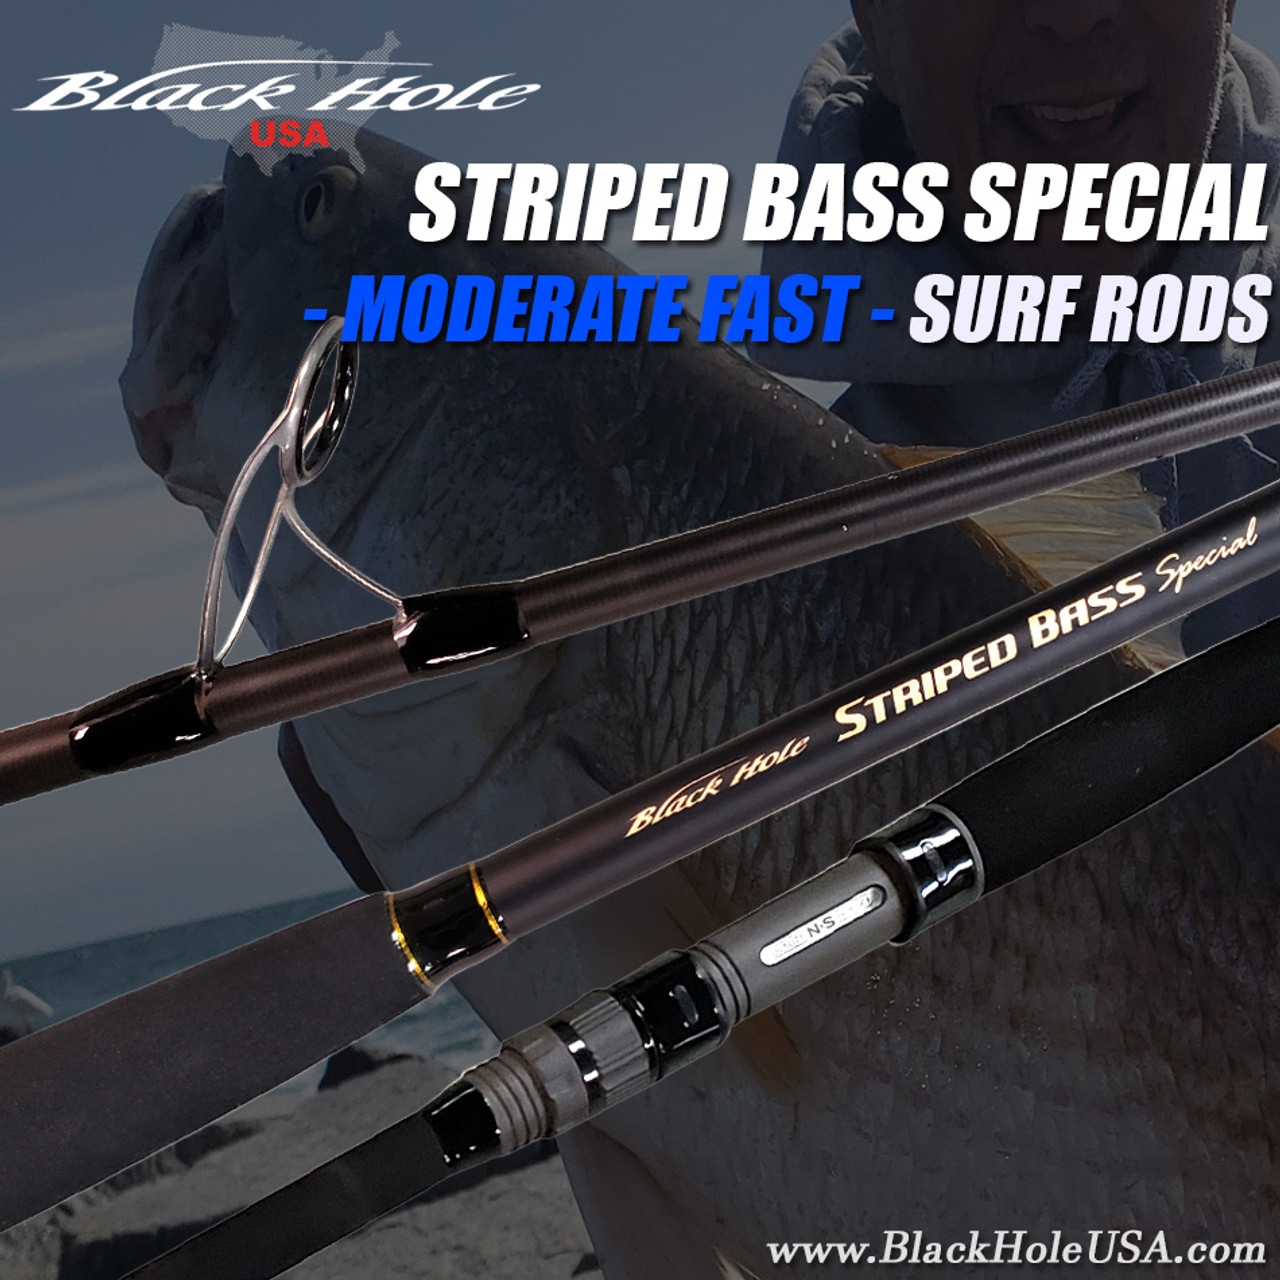 Black Hole USA Striped Bass Special MODERATE FAST Surf Rods, Black Hole  USA, Striped Bass